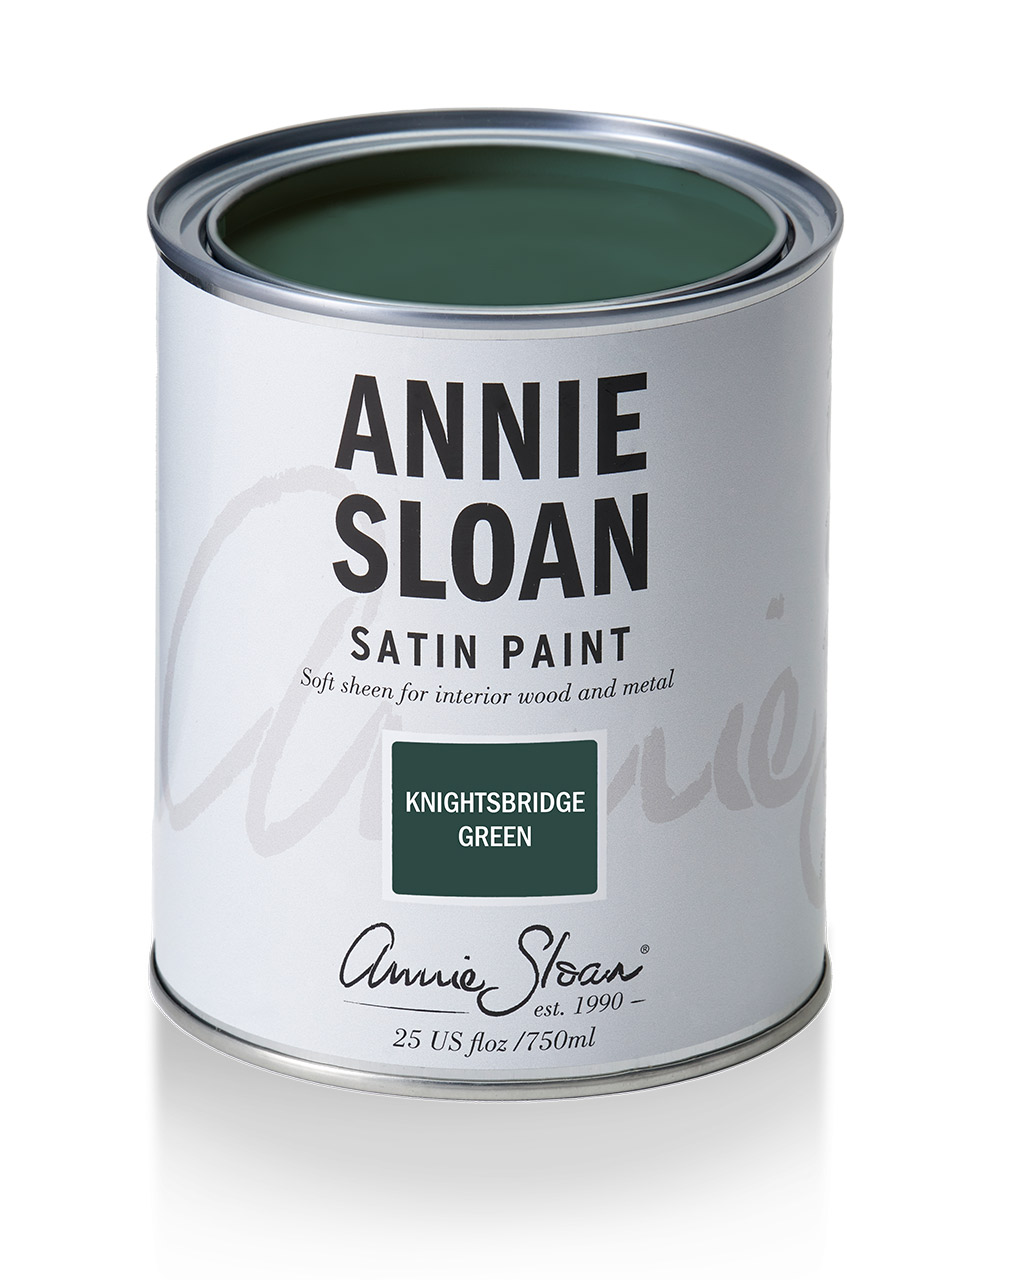 Product shot of Annie Sloan Satin Paint tin in Knightsbridge Green